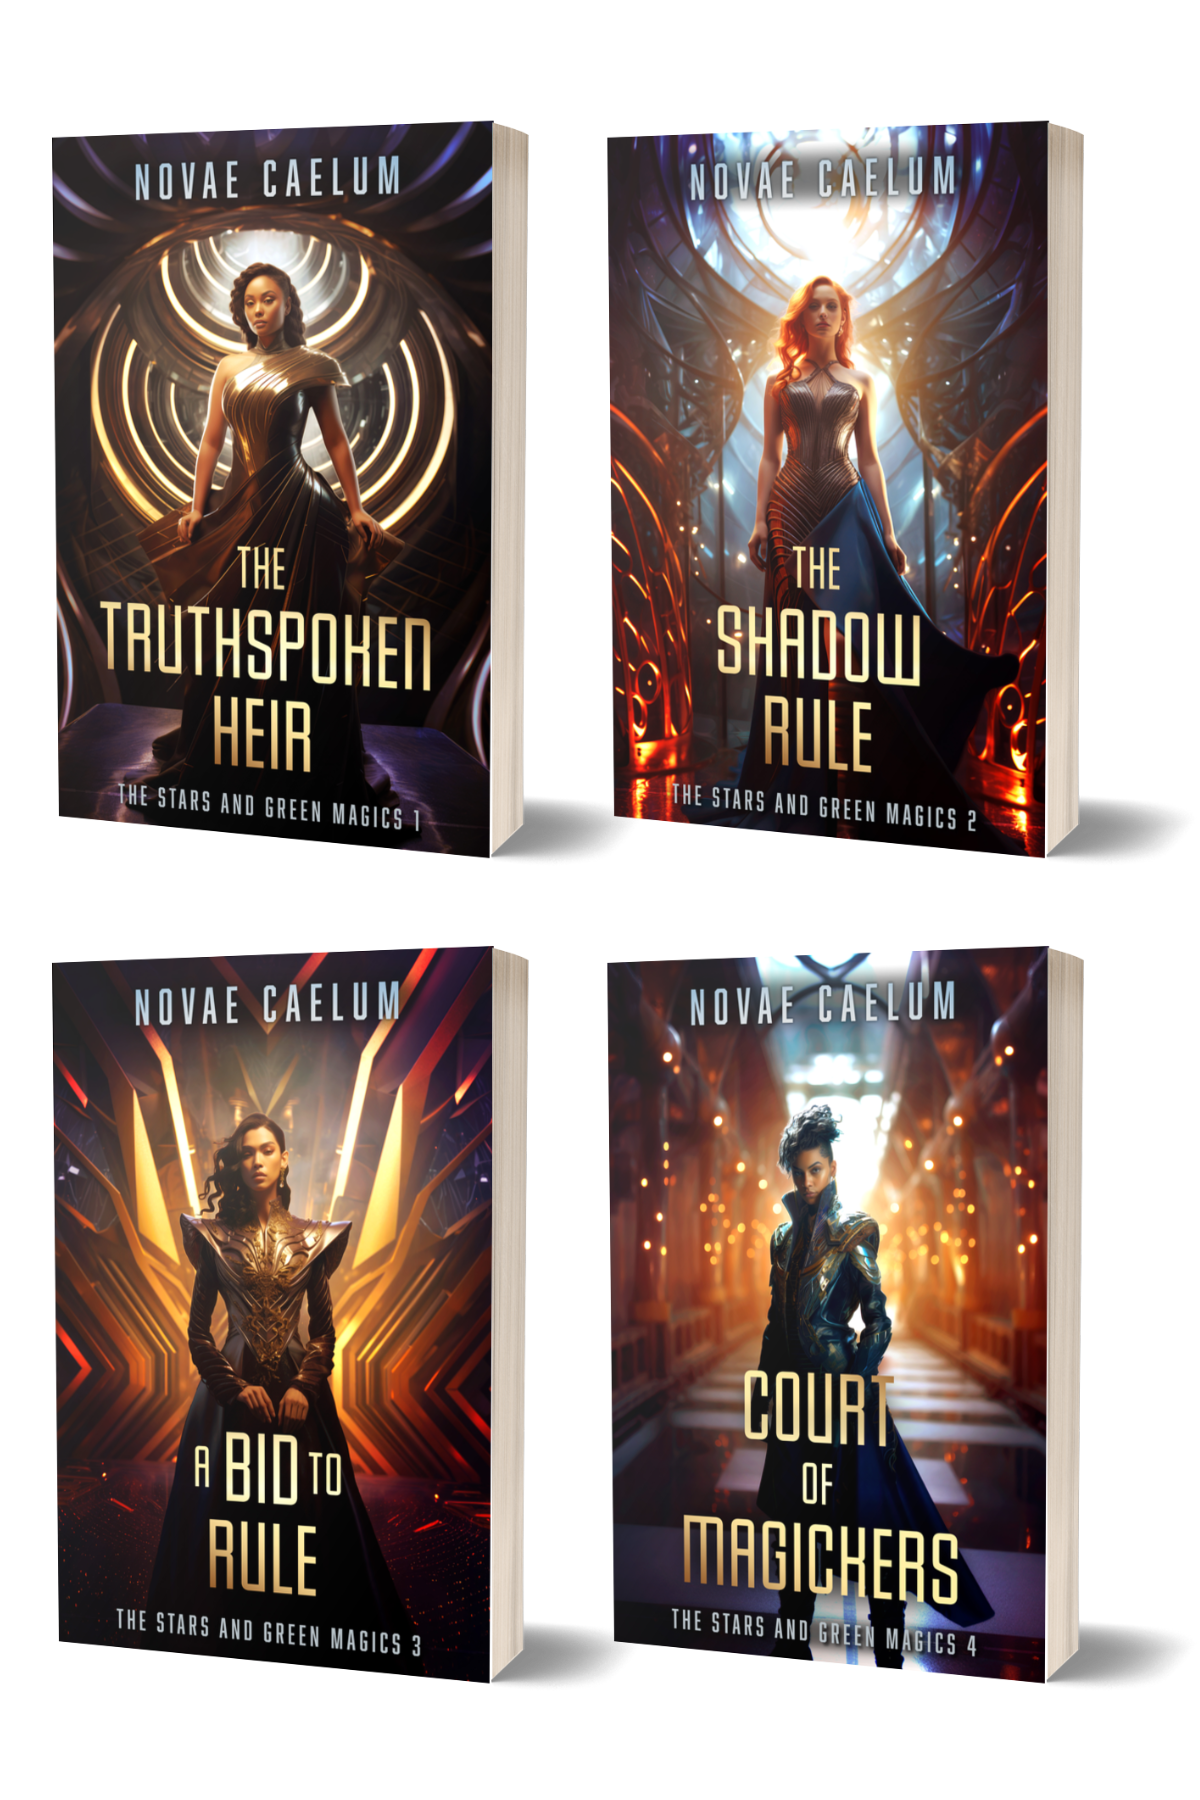 Four Novae Caelum book covers showcasing the captivating world of the Shadowshade trilogy, where shapeshifters and space magic collide in an interstellar kingdom.